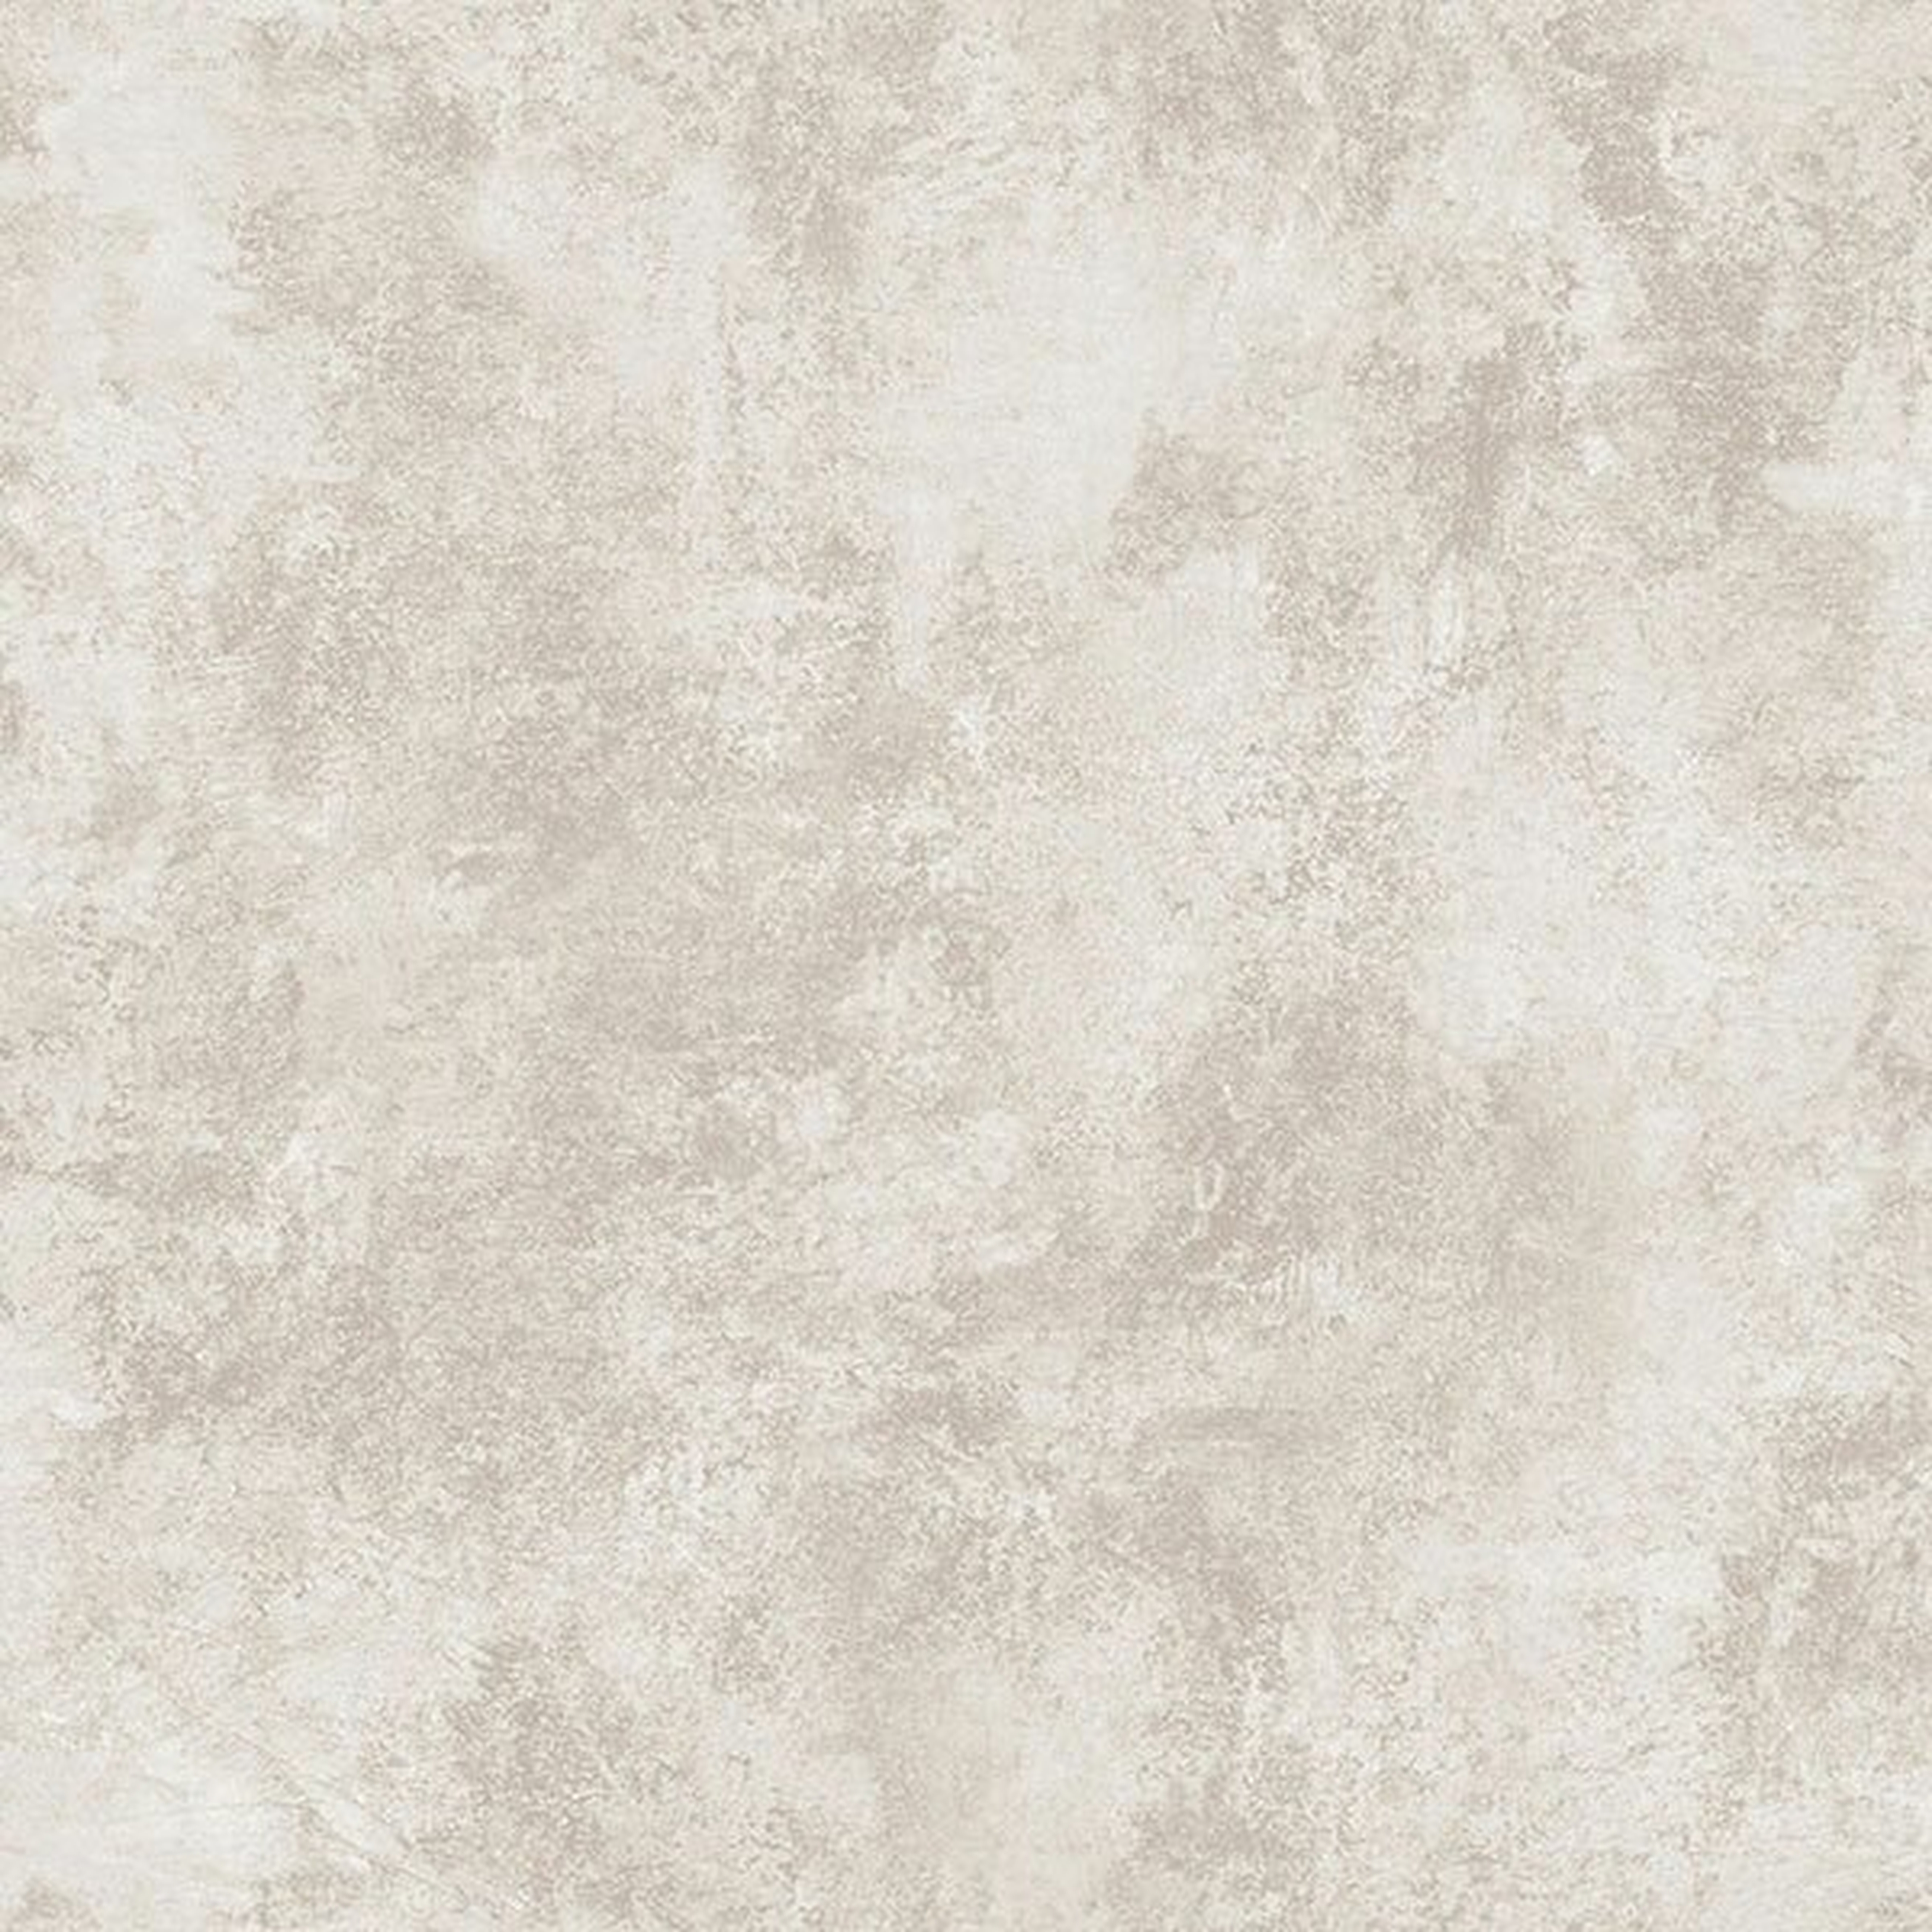 Galerie Wallcoverings Nostalgie Marble Effect 33' L x 21"" W Smooth Wallpaper Roll - Perigold